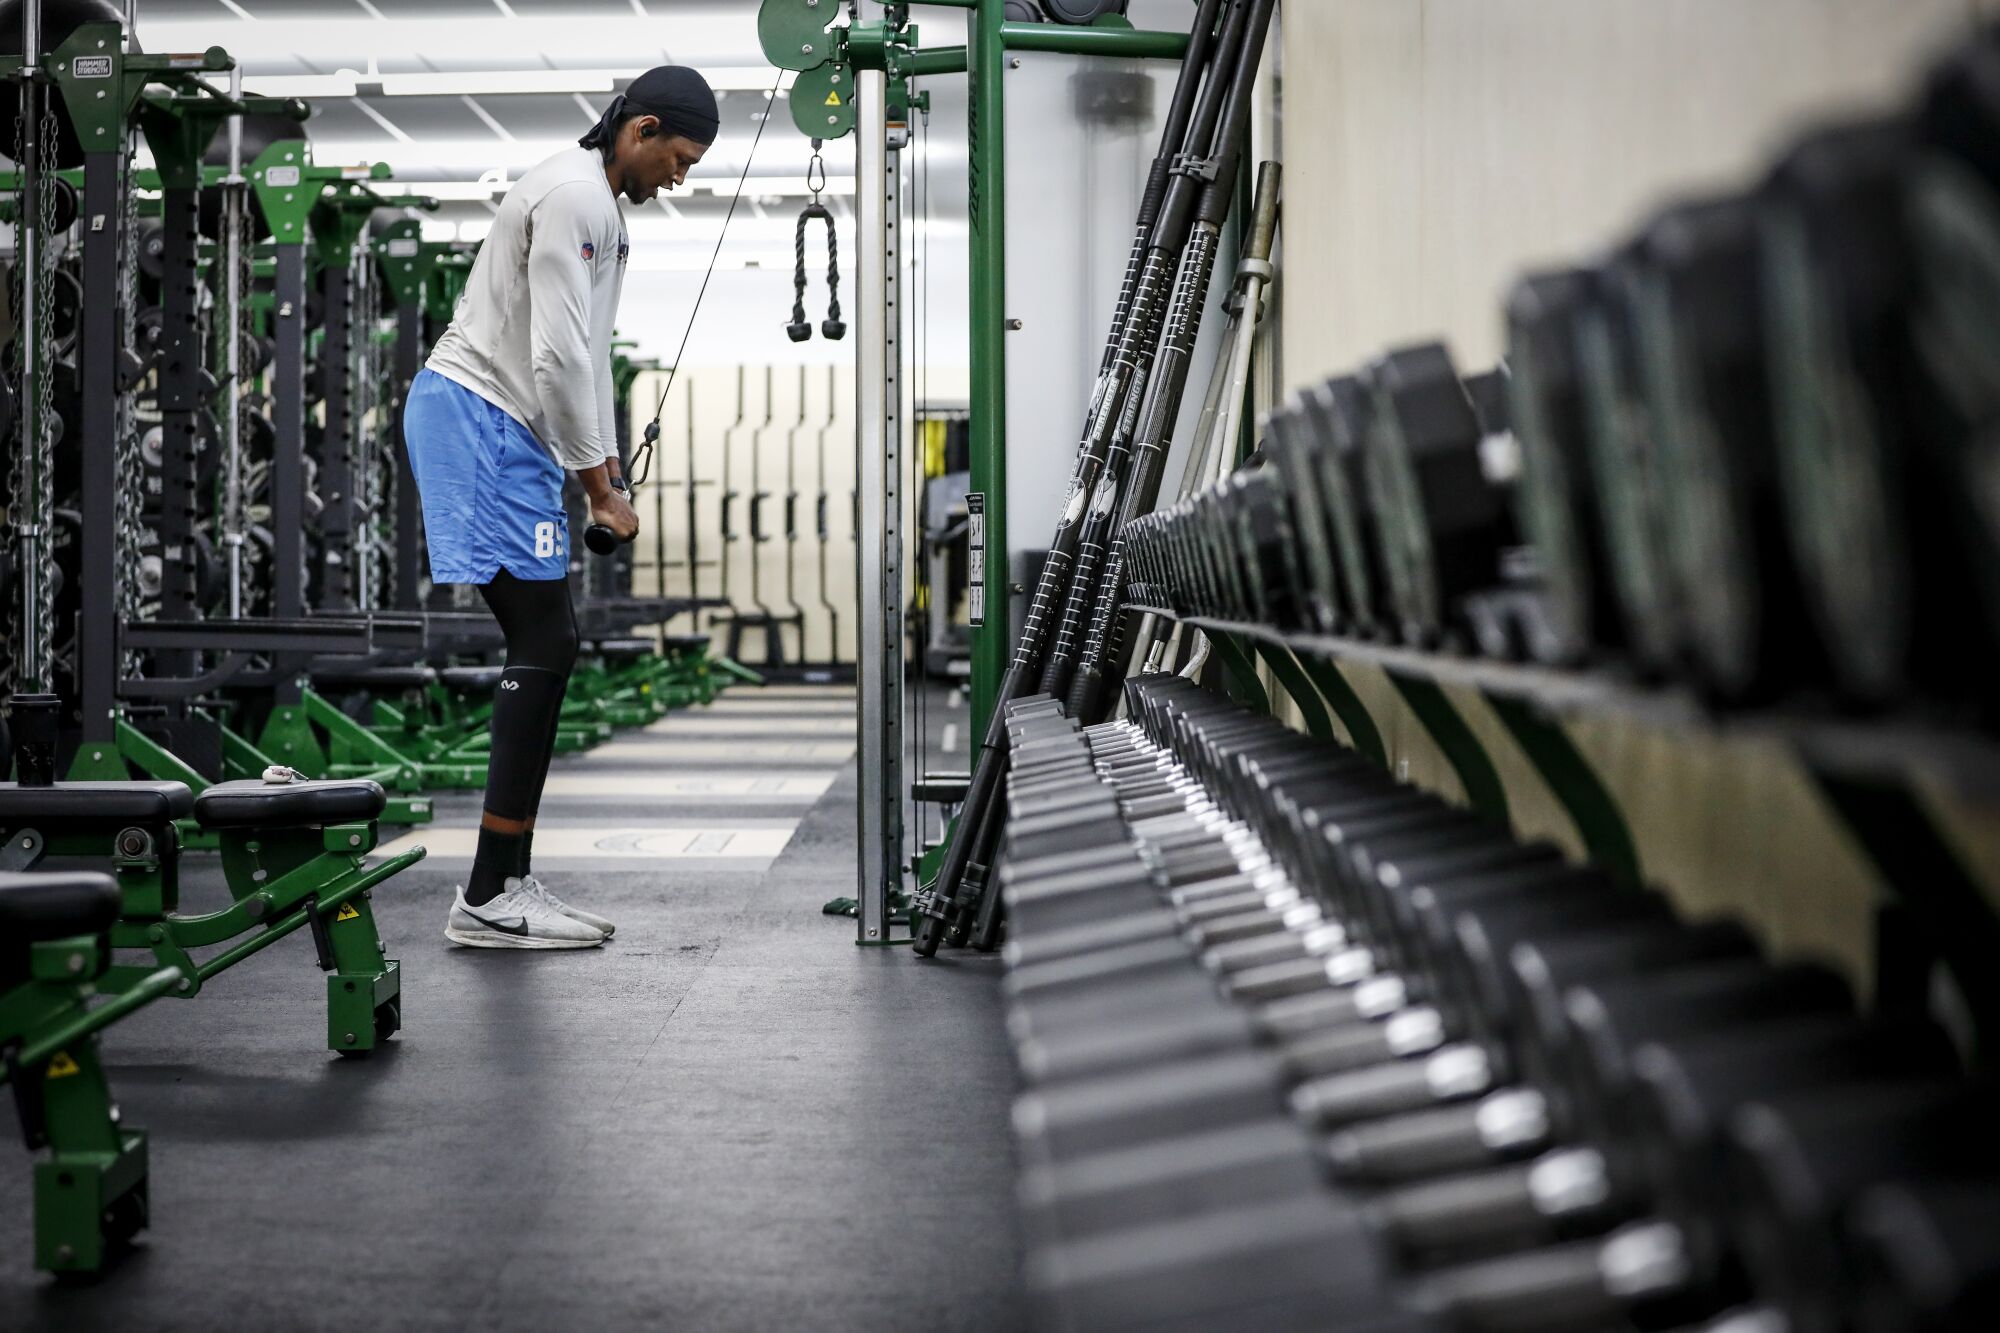 Donald Parham Jr.  trains in the weight room at Stetson University in DeLand, Fla., on April 7.